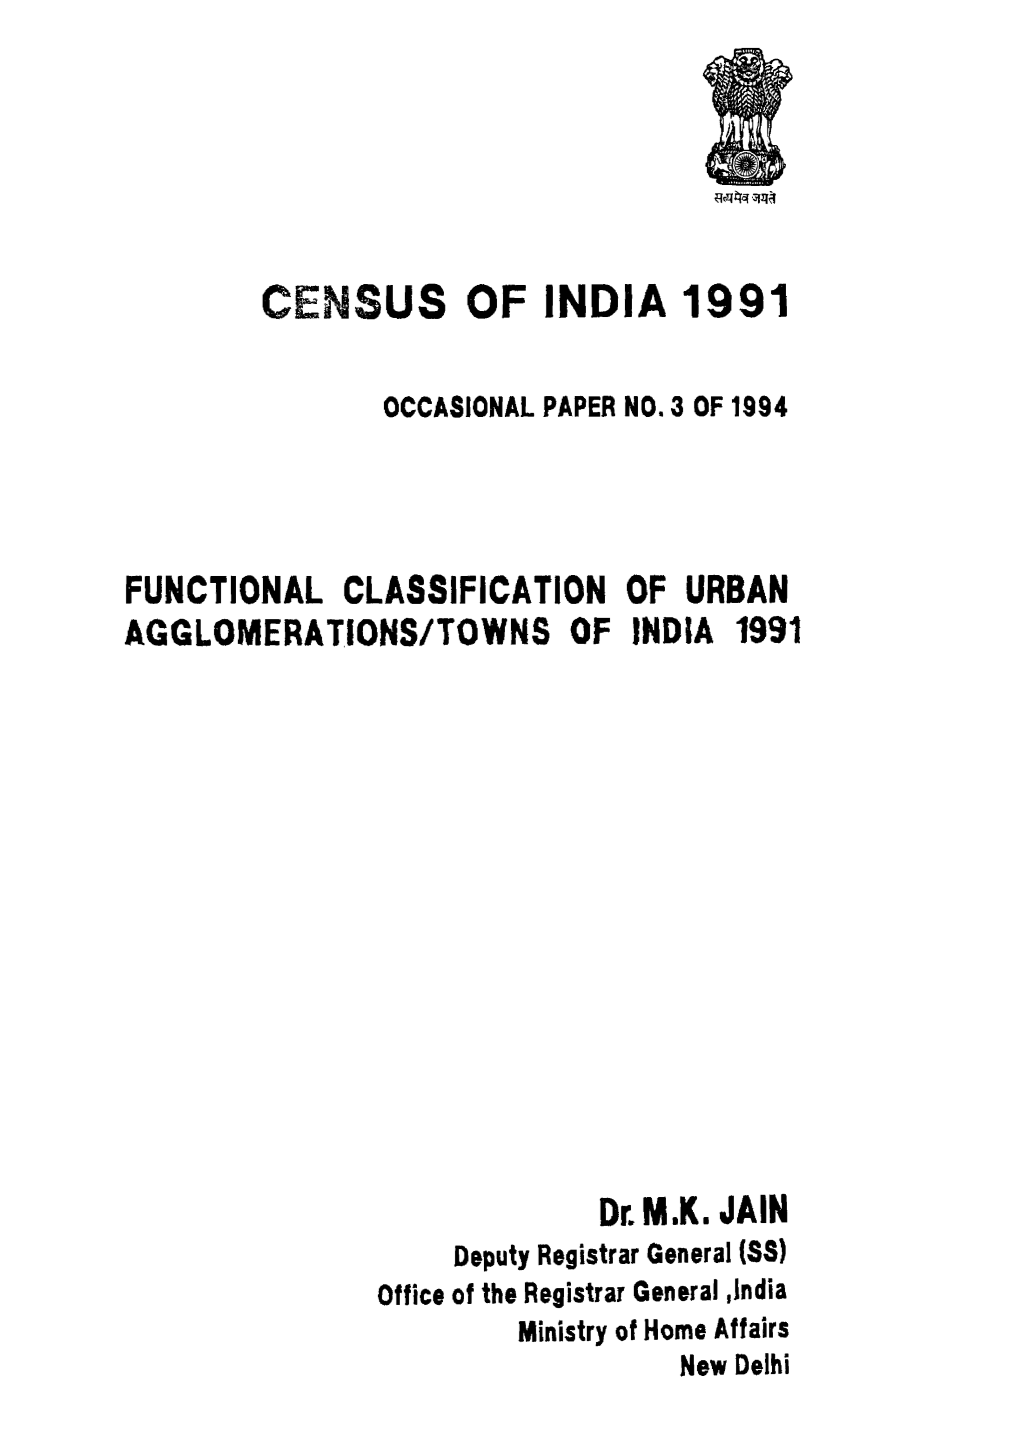 Functional Classification of Urban Agglomerations/Towns of India 1991